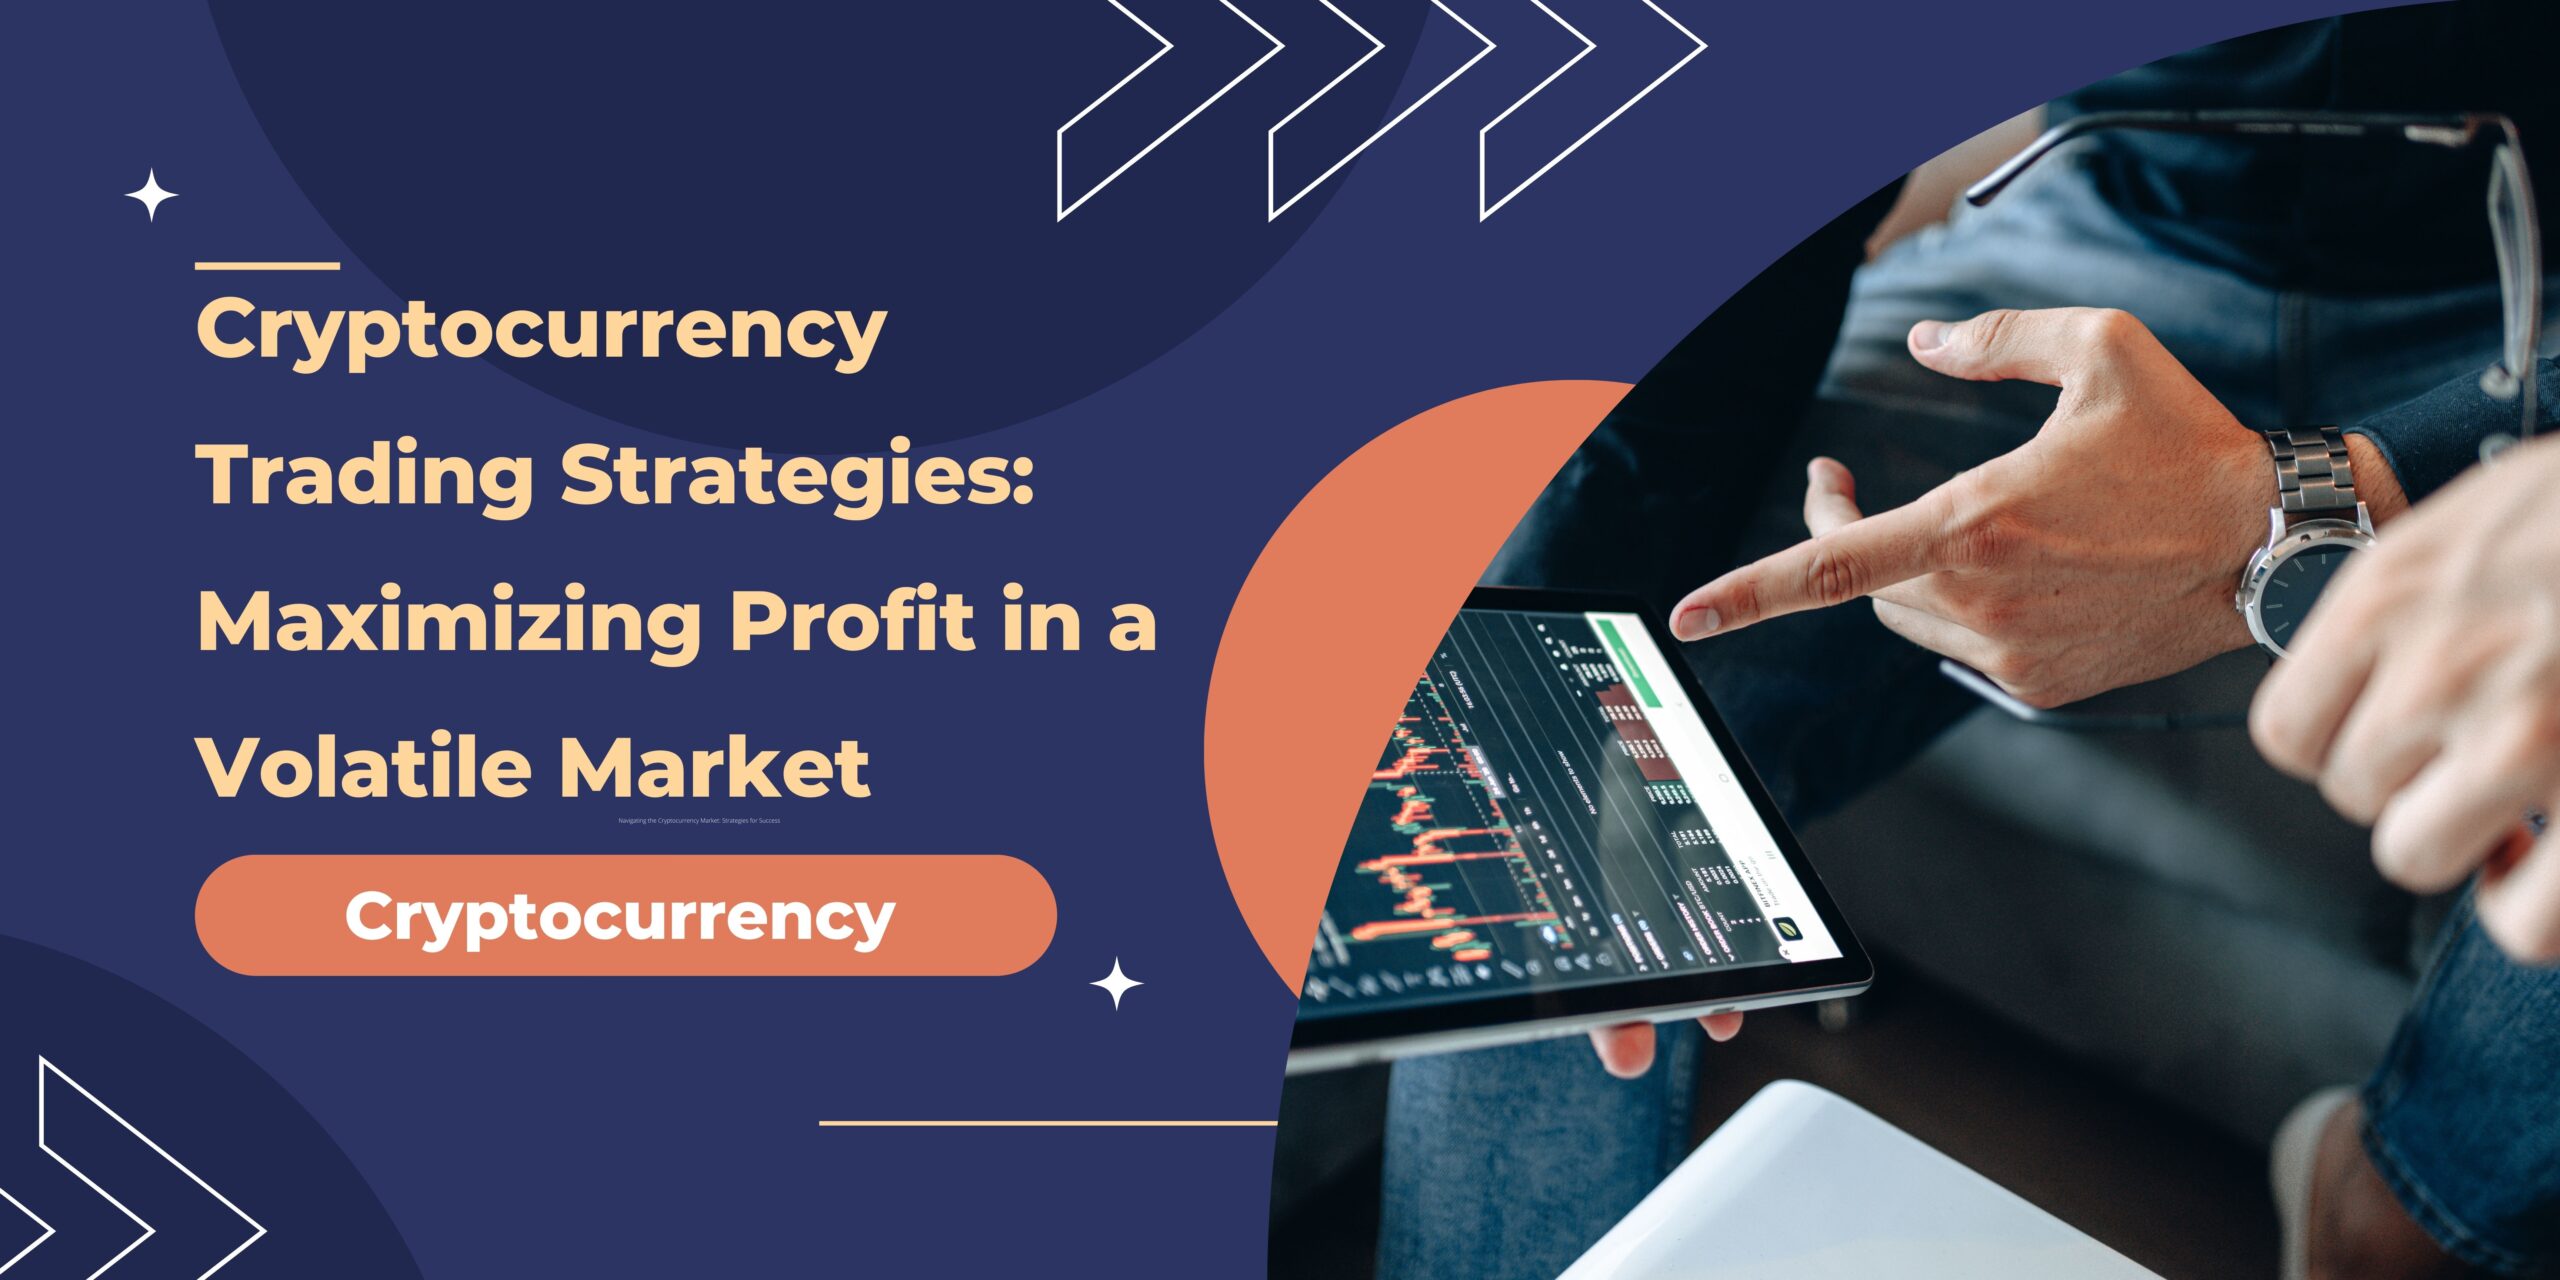 Cryptocurrency Trading Strategies: Maximizing Profit in a Volatile Market